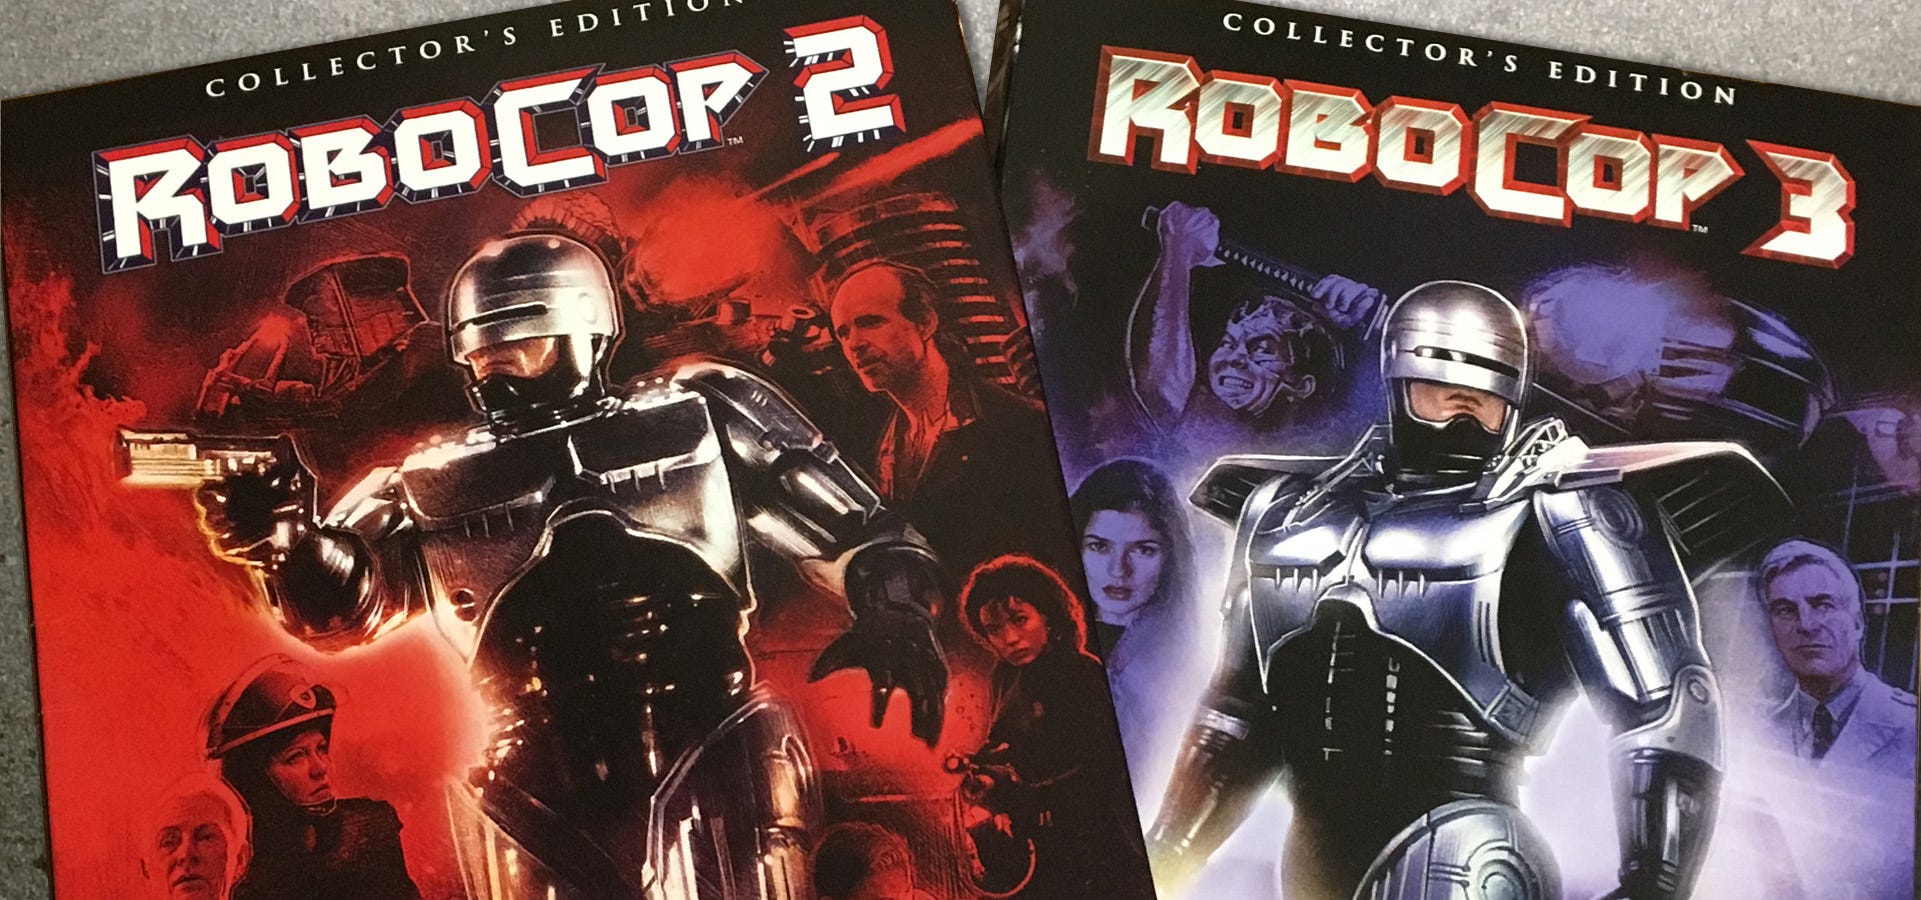 It's Killer, And I Saw It! — Scream Factory's Blu-ray Revival of ROBOCOP 2  & 3 | by Austin Vashaw | Cinapse